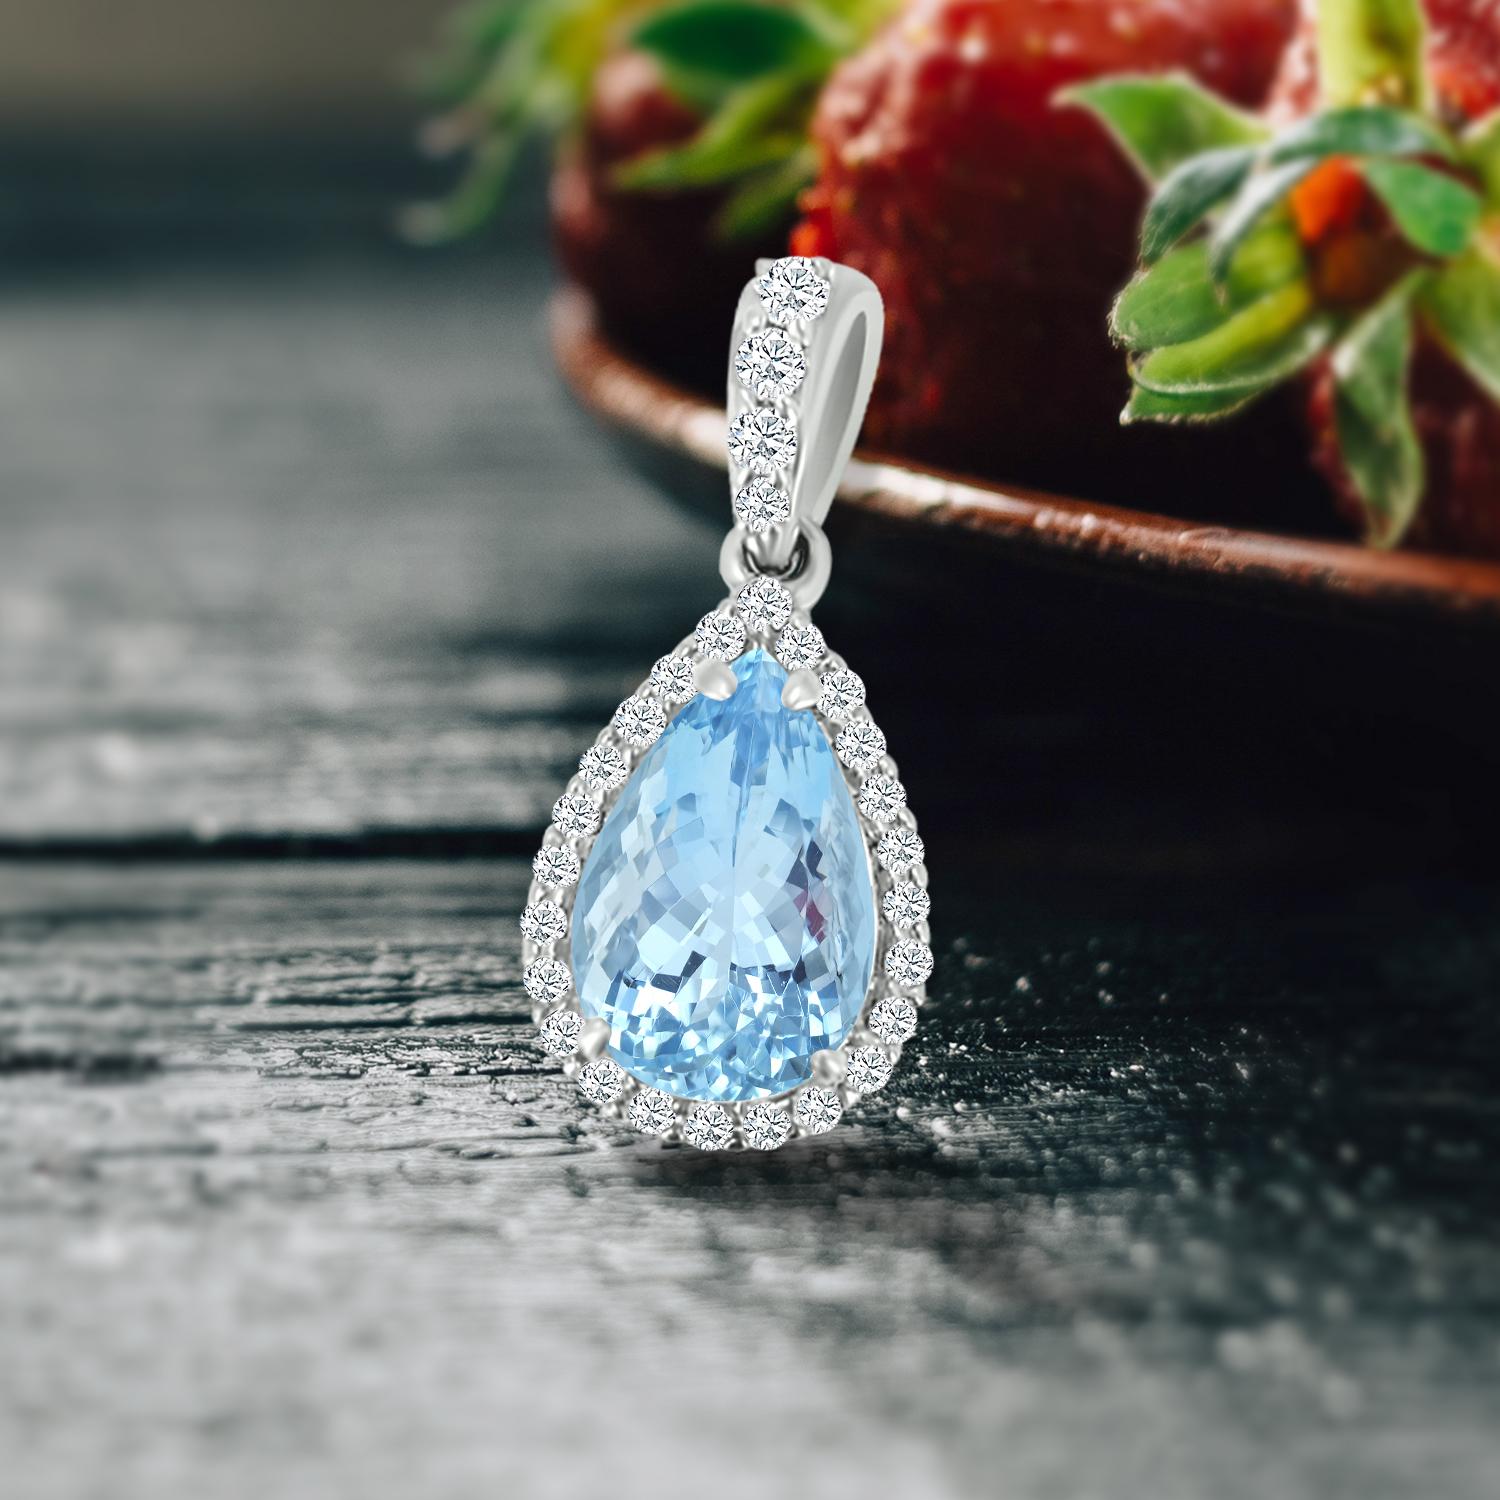 Pear Cut 14k White Gold 0.92cts Aquamarine and Diamond Pendant, Style#TS1234AQP 22053/4 For Sale